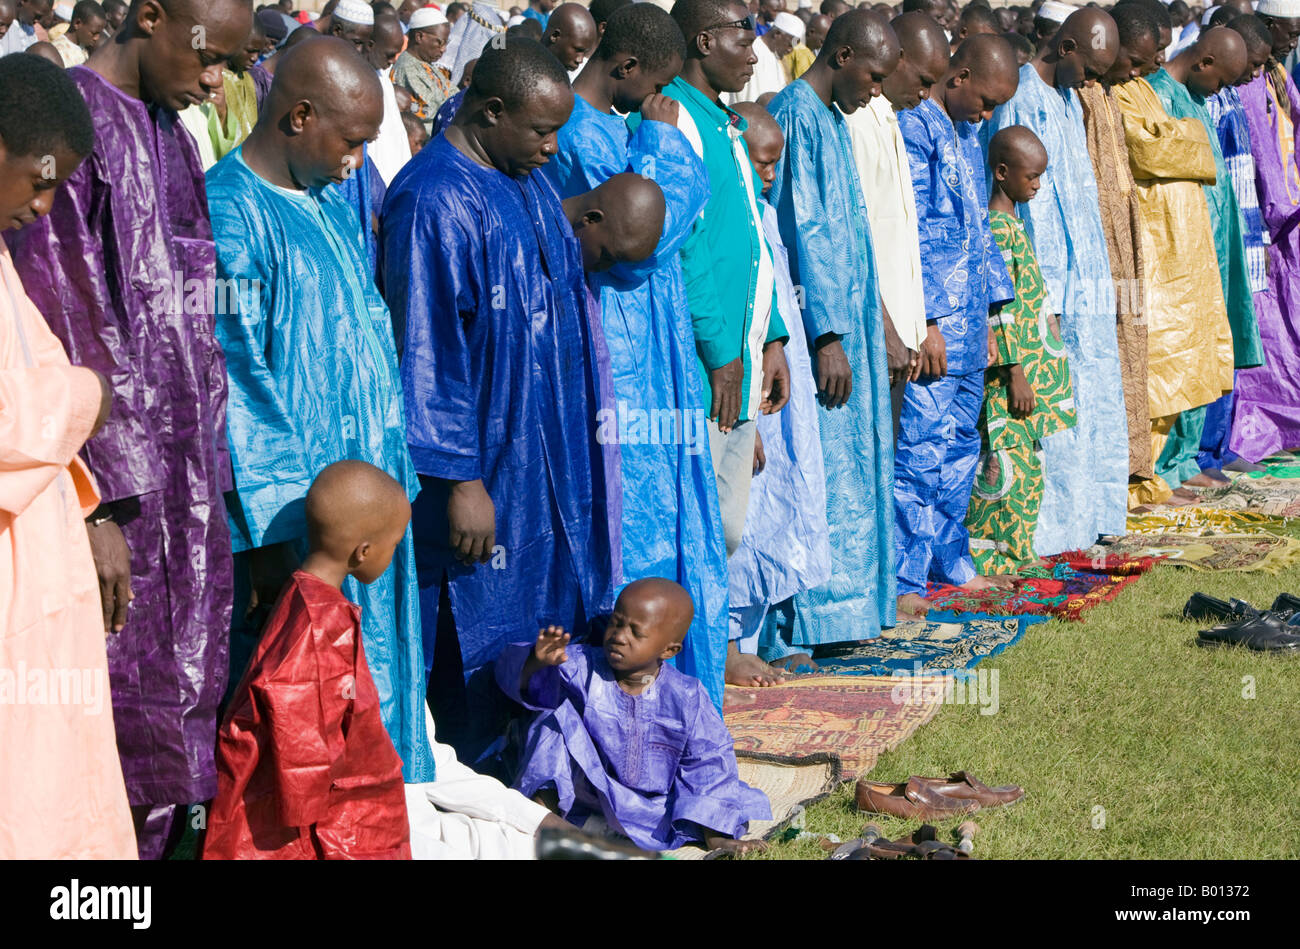 Mali, Mopti. An open-air Muslim prayer service to commemorate the end of the Muslim holy month of Ramadan. Stock Photo